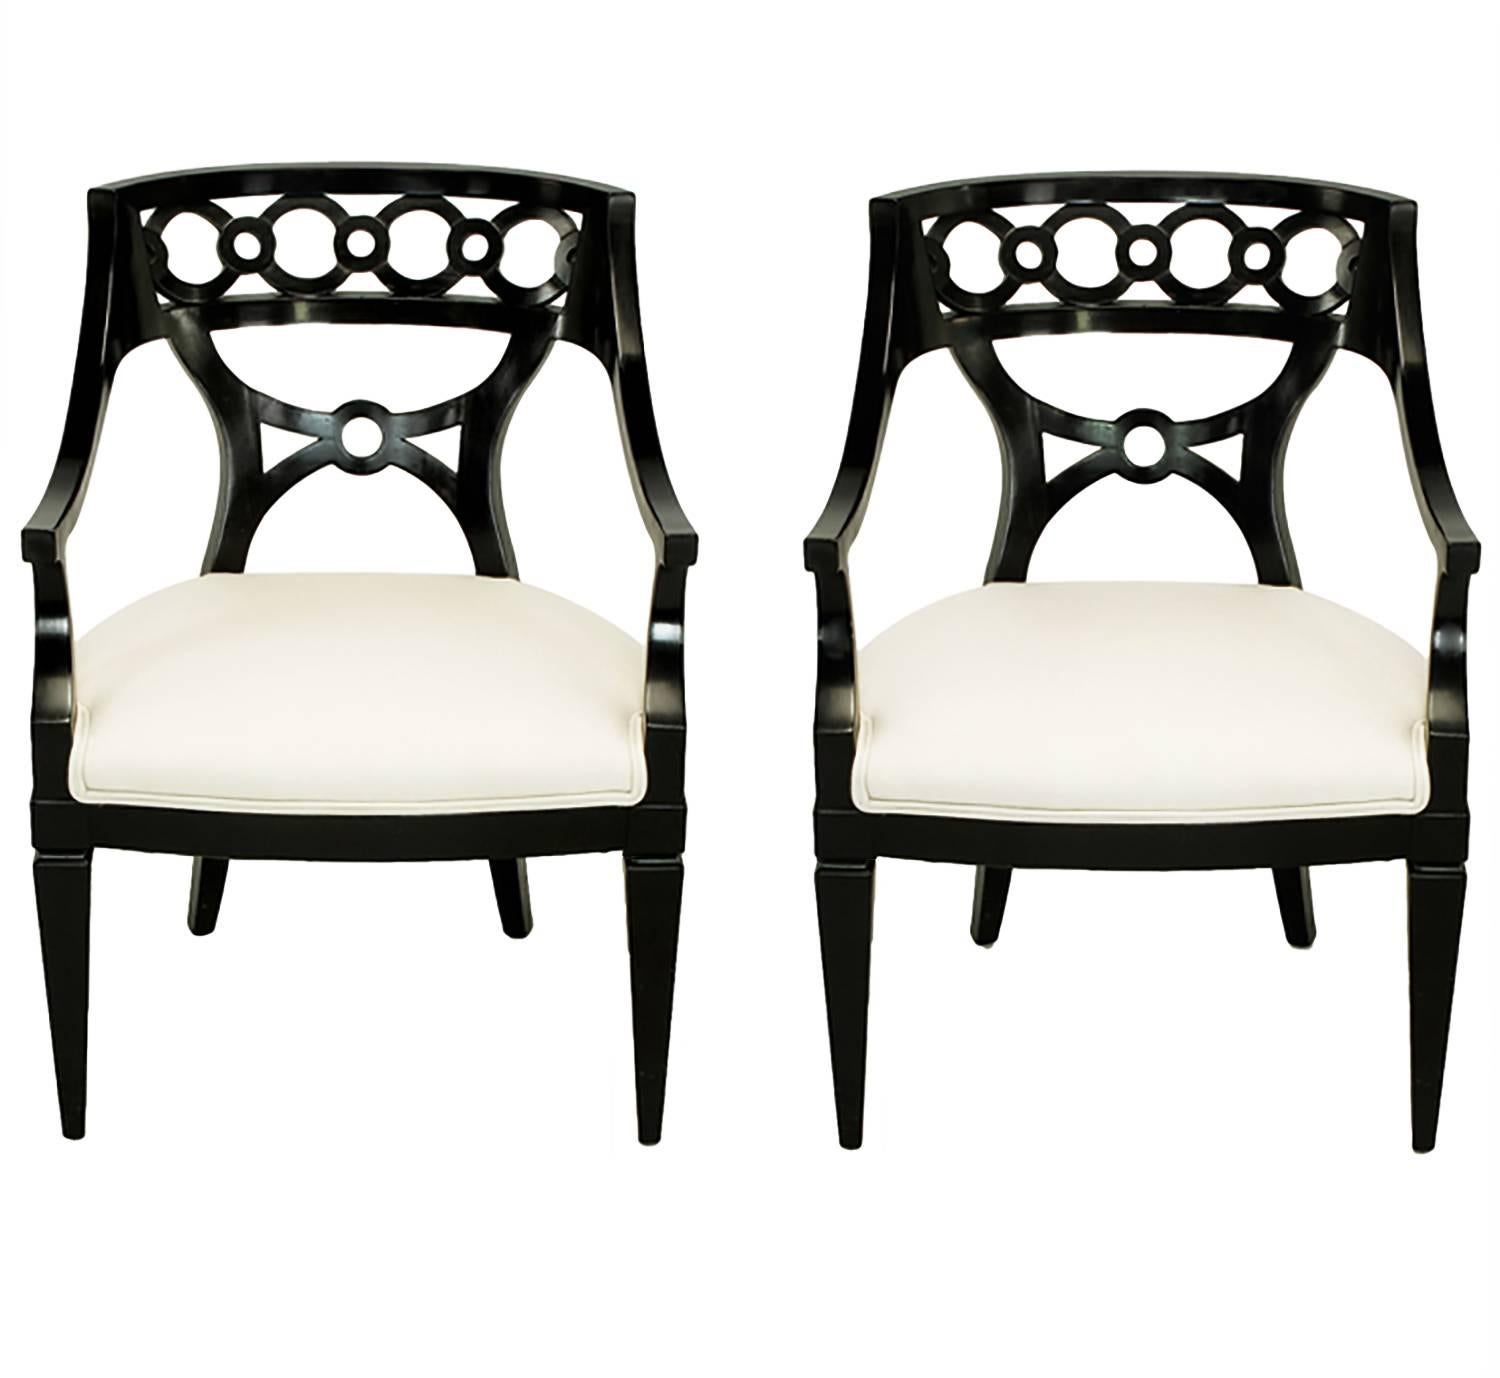 Pair of Black Lacquer and Wool Armchairs with Interlocking Rings